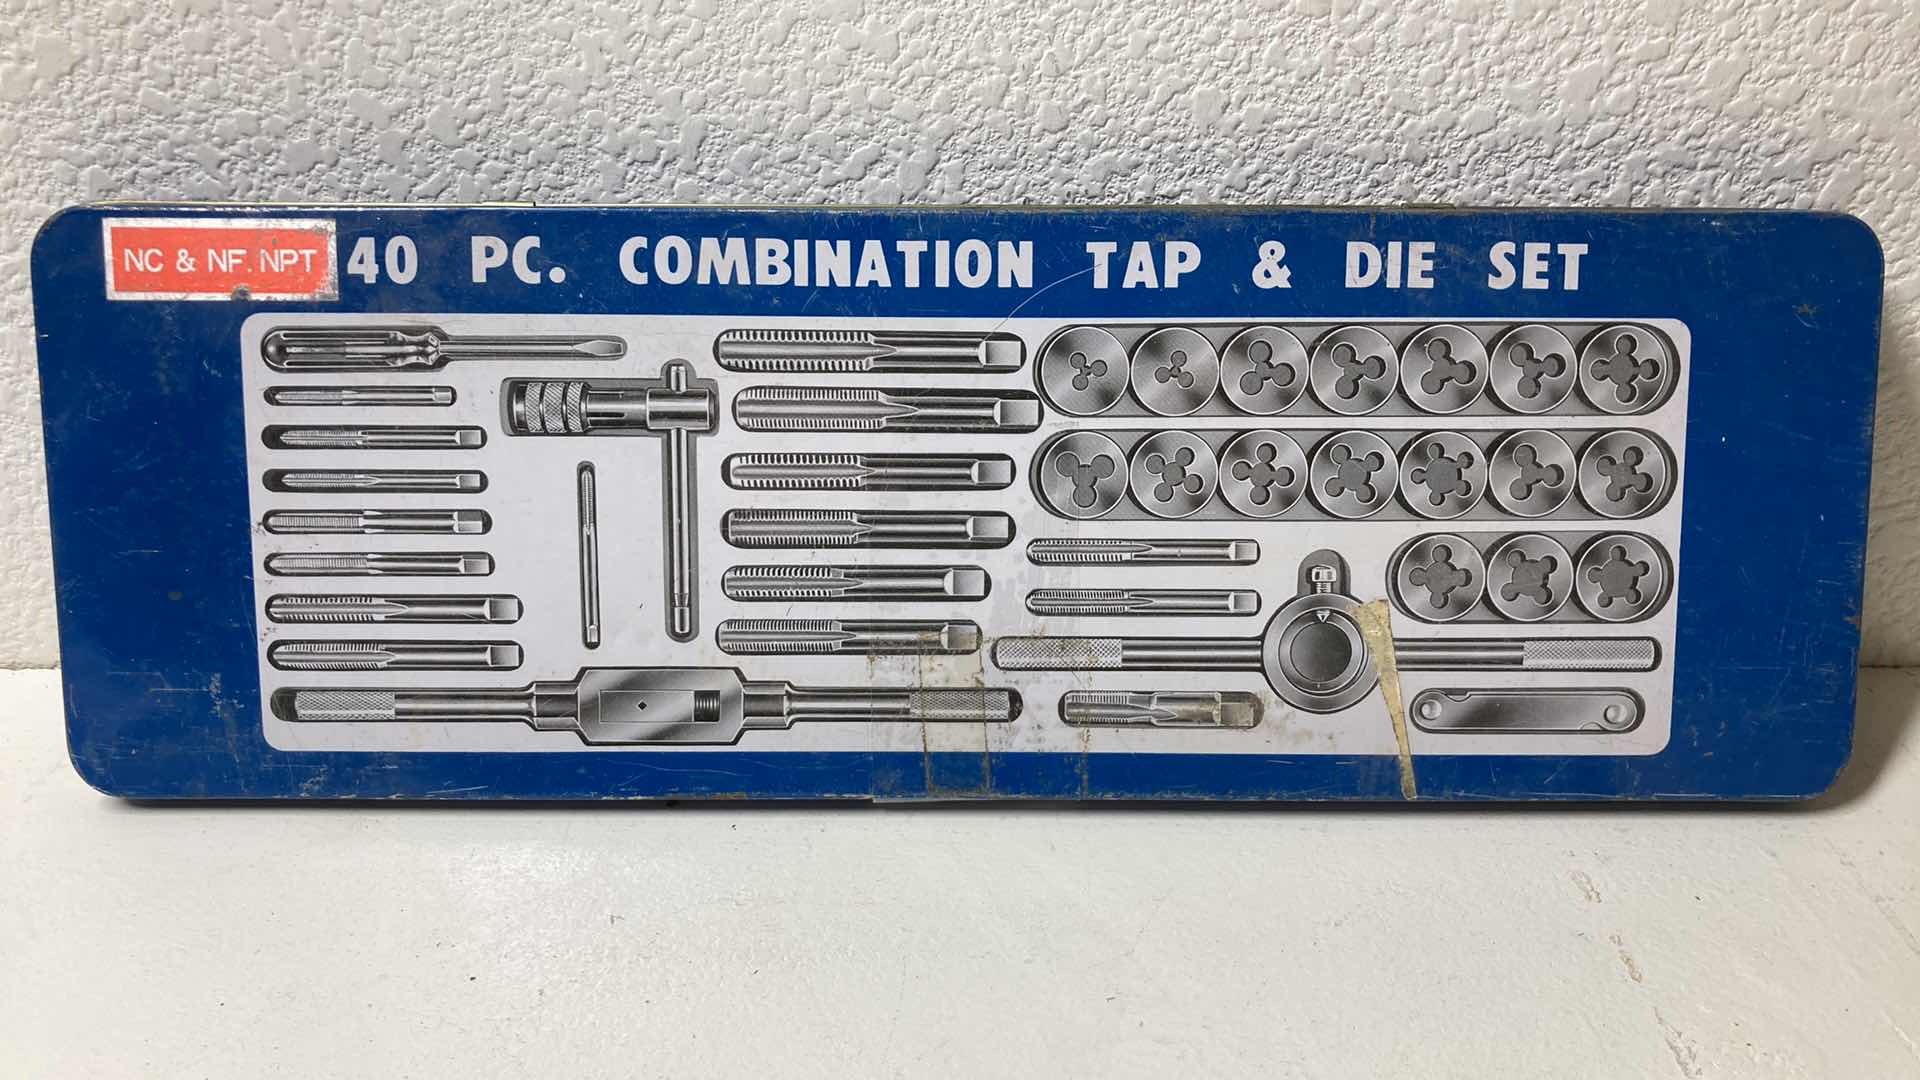 Photo 2 of NC & NF.NPT COMBO TAP & DIE SET W TIN CASE & EXTRA BITS